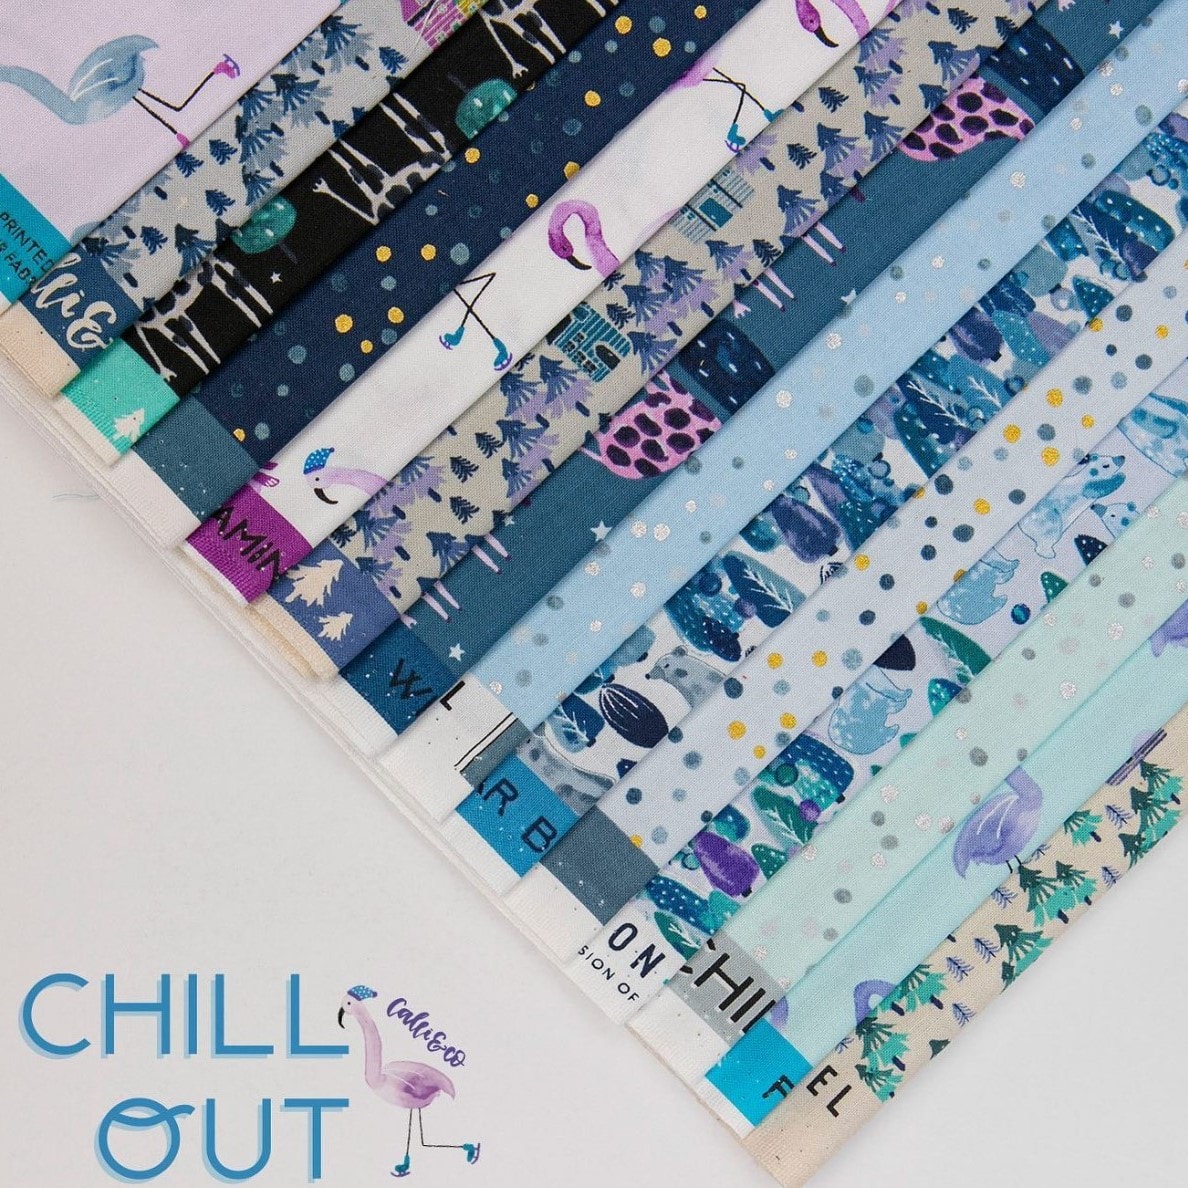 Chill Out | Jessica Zhao